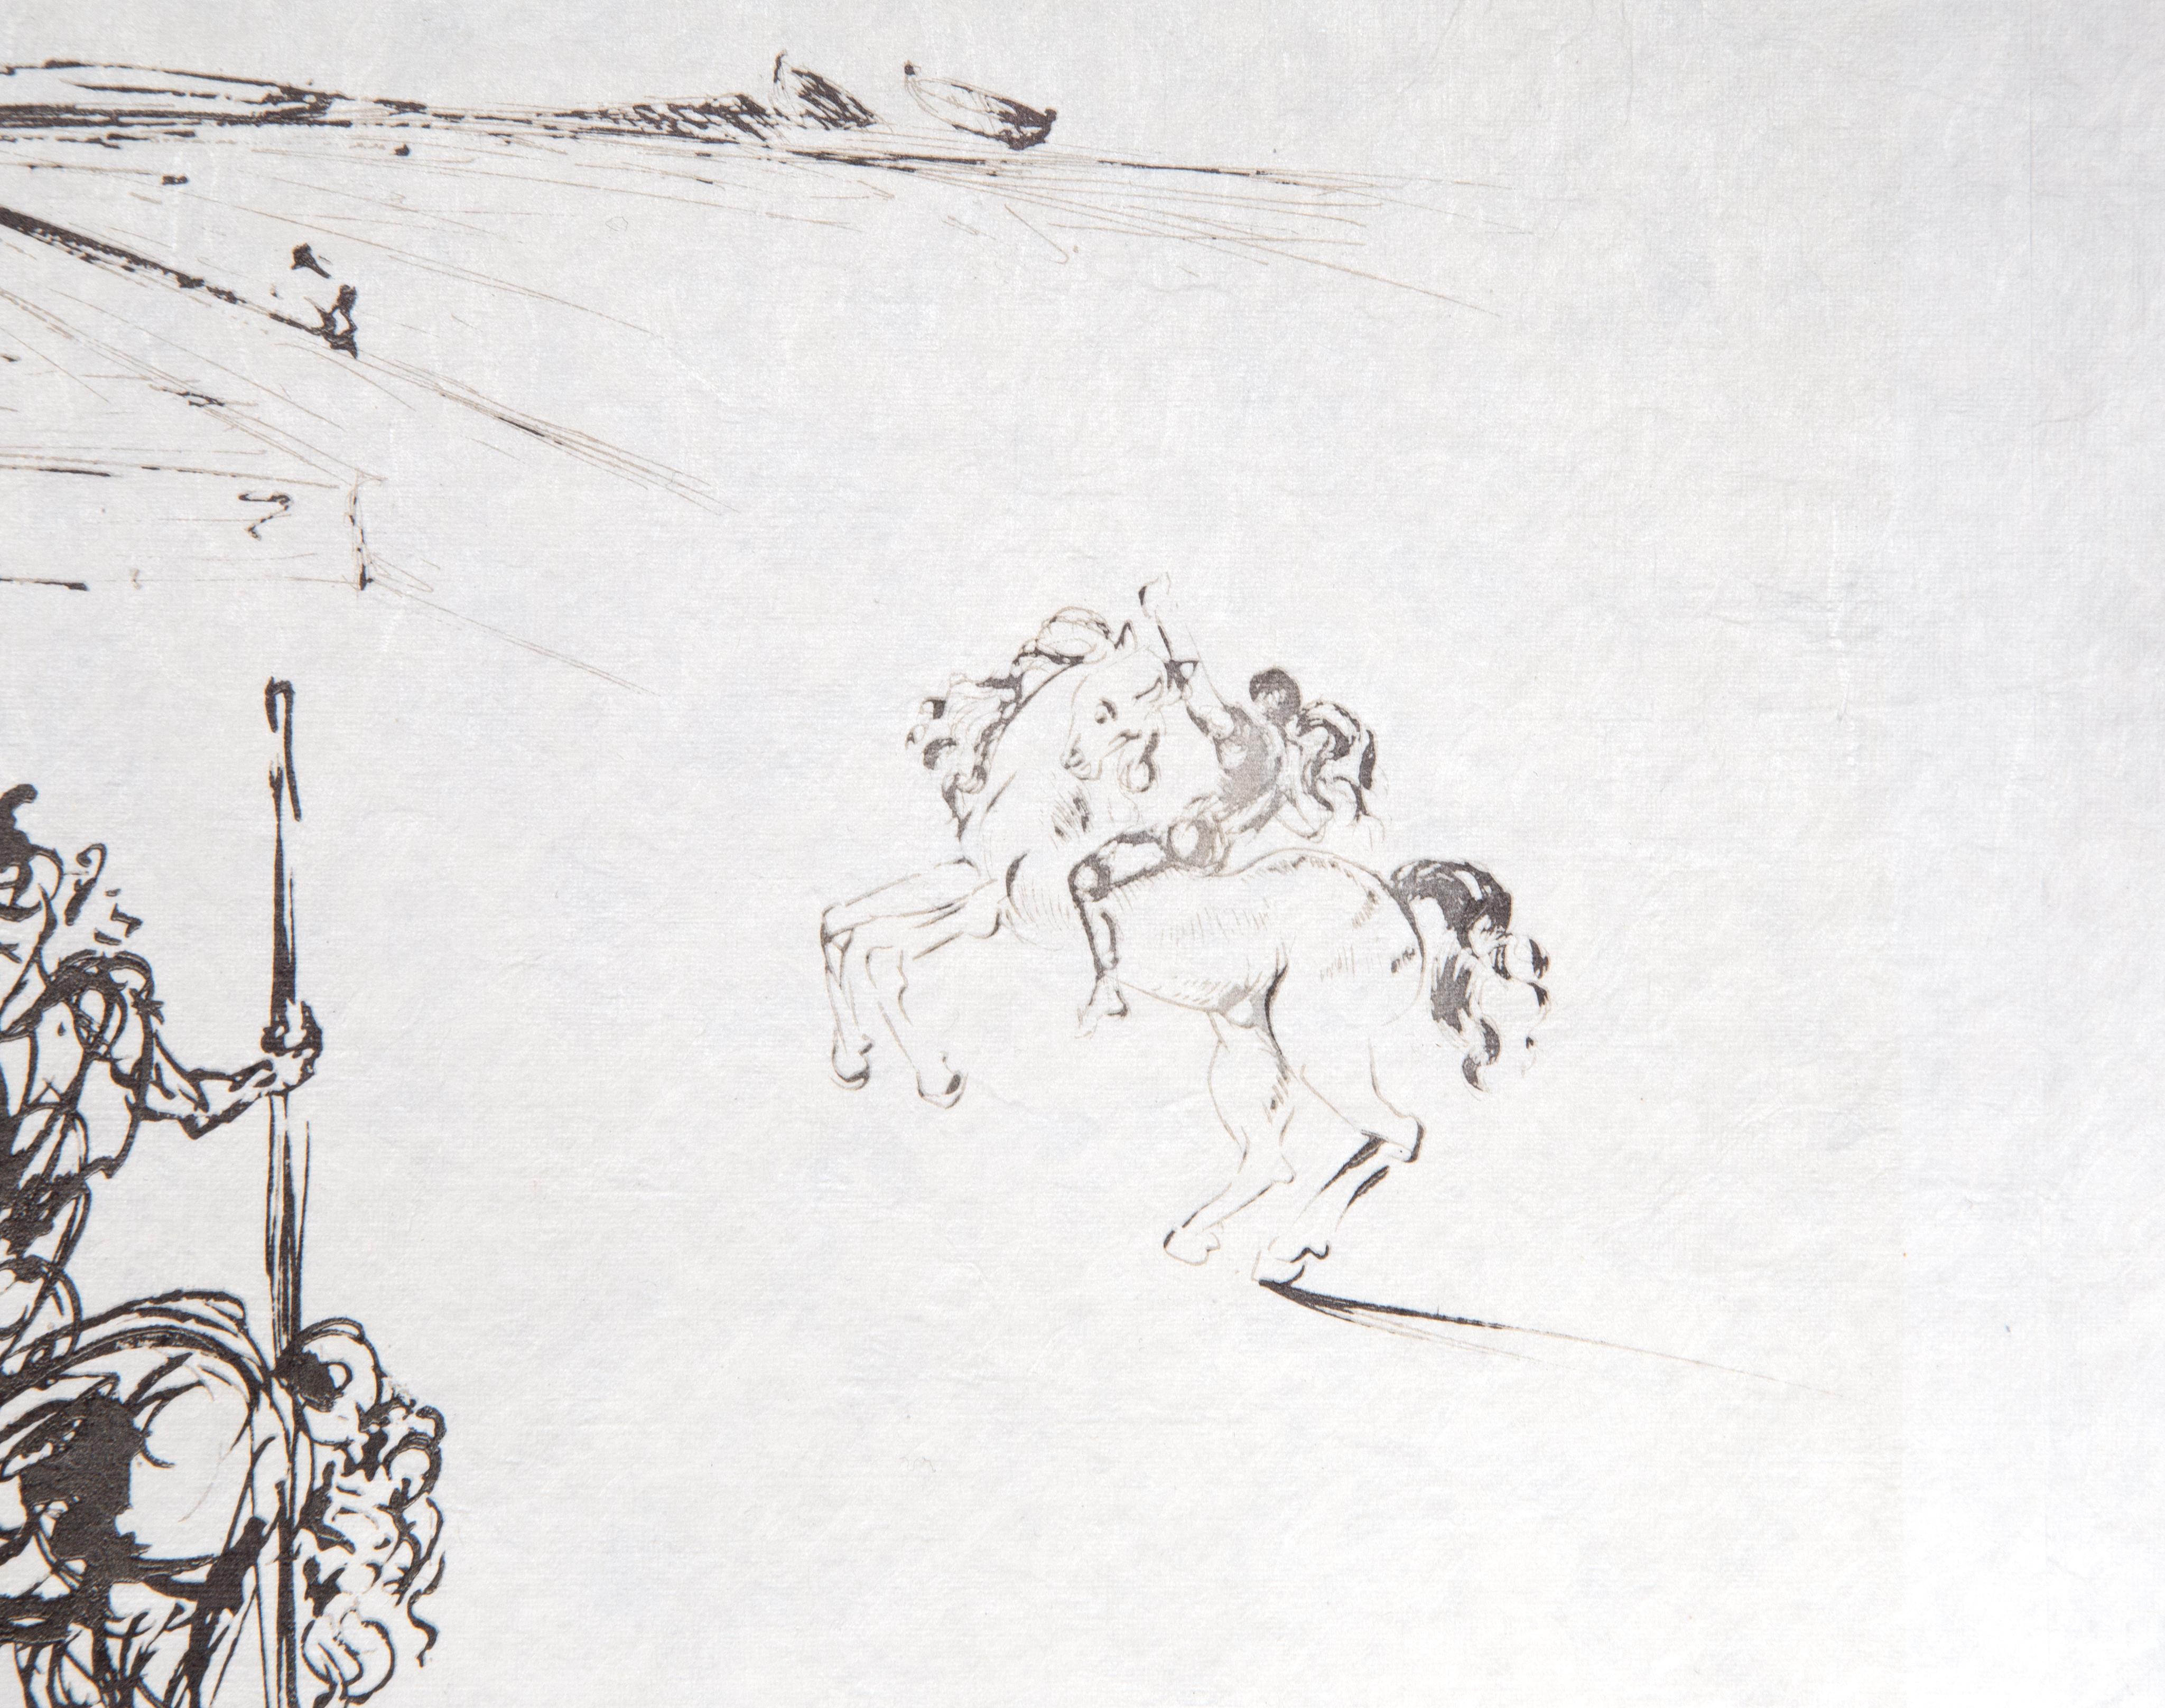 A letterpress and engraving print by Salvador Dali on Japon paper, made in 1973. Numbered as 7/250, this piece was published by EGI and referenced in Field as 73-21.

Road To Ampurdam (Rome and Cadaques)
Salvador Dali, Spanish (1904–1989)
Portfolio: